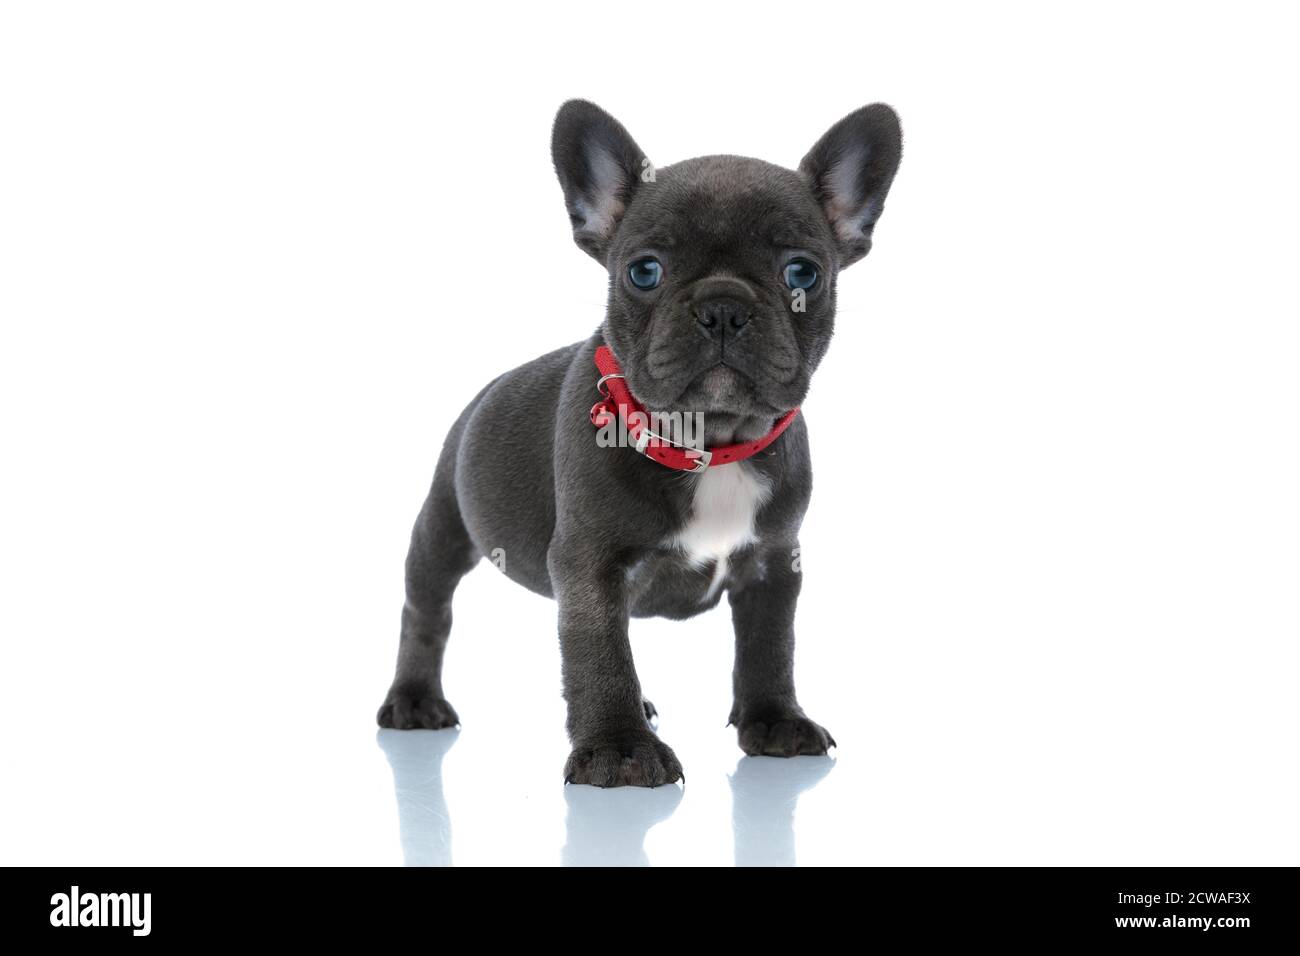 Jolly French bulldog cub looking forward and while wearing a red collar and standing on white studio background Stock Photo